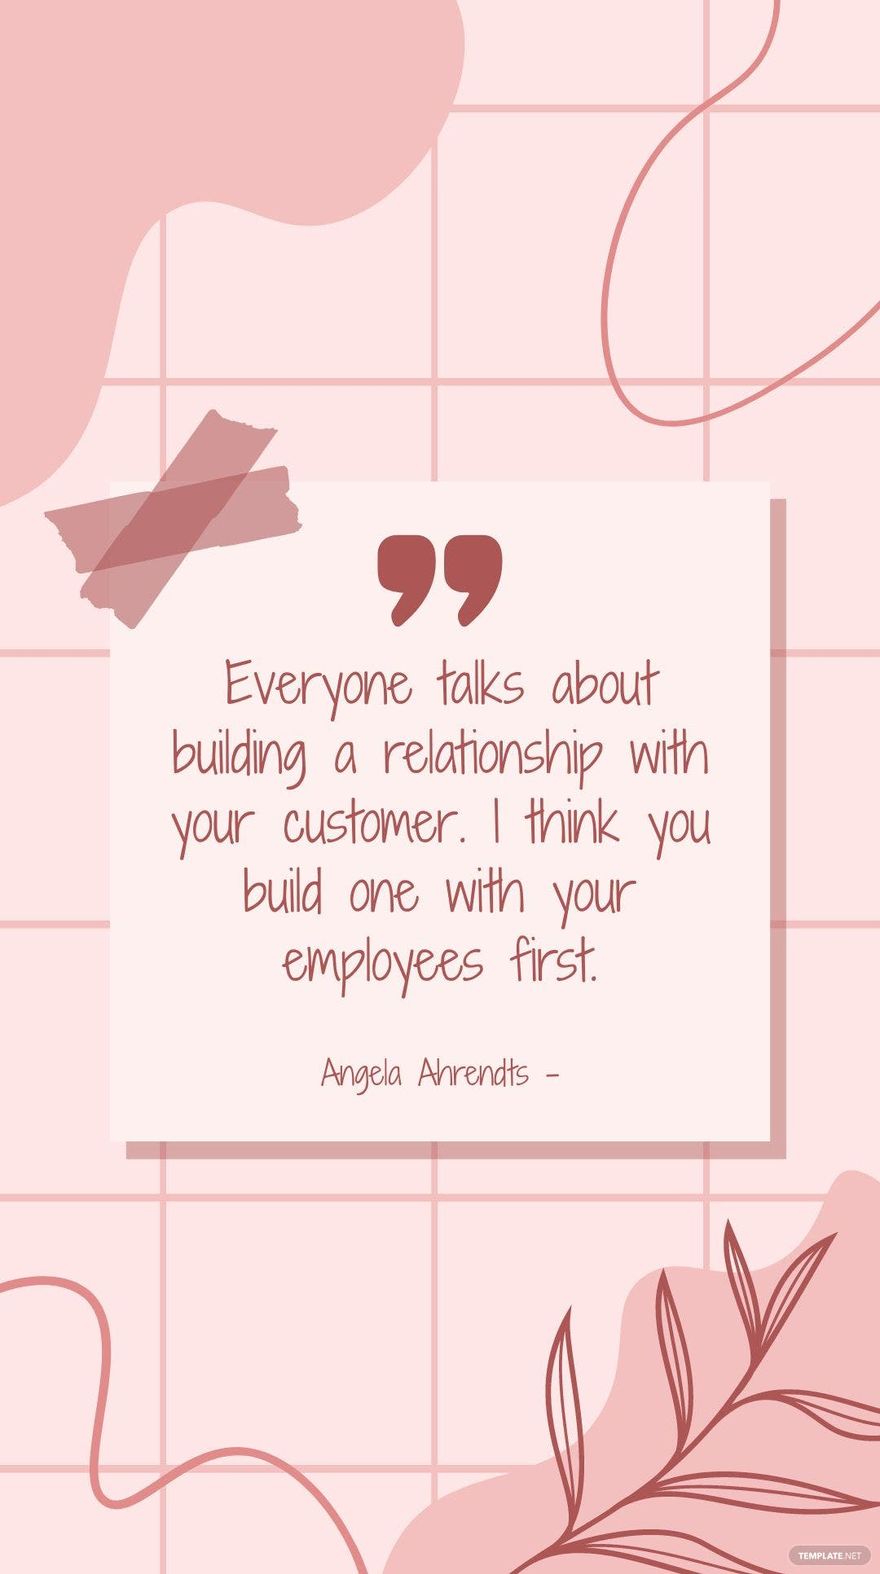 Angela Ahrendts - Everyone talks about building a relationship with your customer. I think you build one with your employees first.